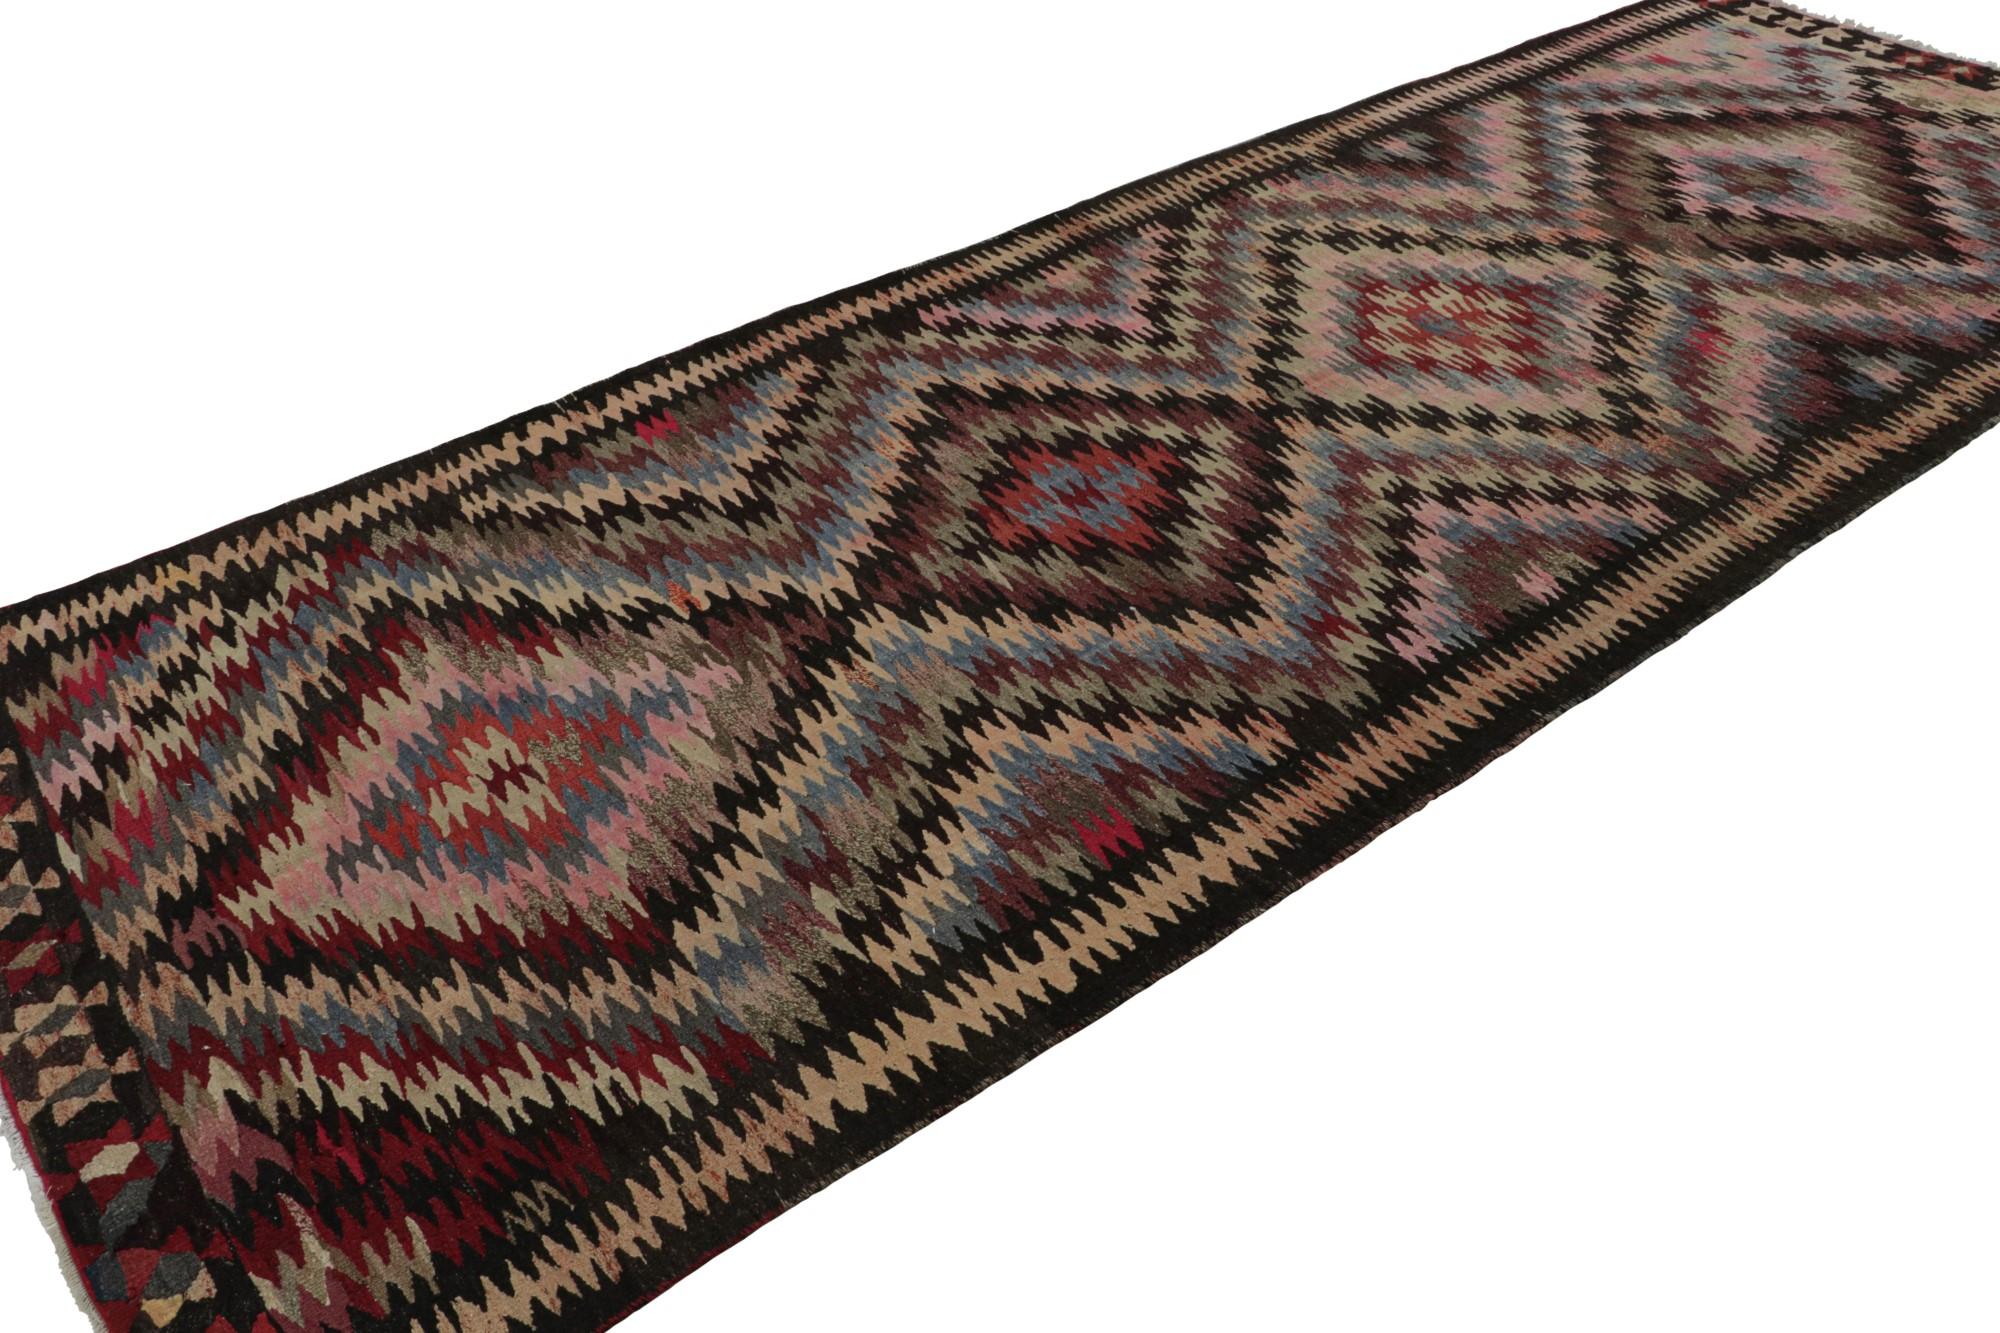 Handwoven in wool circa 1950-1960, this 5x13 vintage Afghani Kilim is a new curation from Rug & Kilim’s primitivist flatweaves. 

On the Design:

Specifically believed to originate from an Afghani tribe, this gallery runner boasts polychromatic